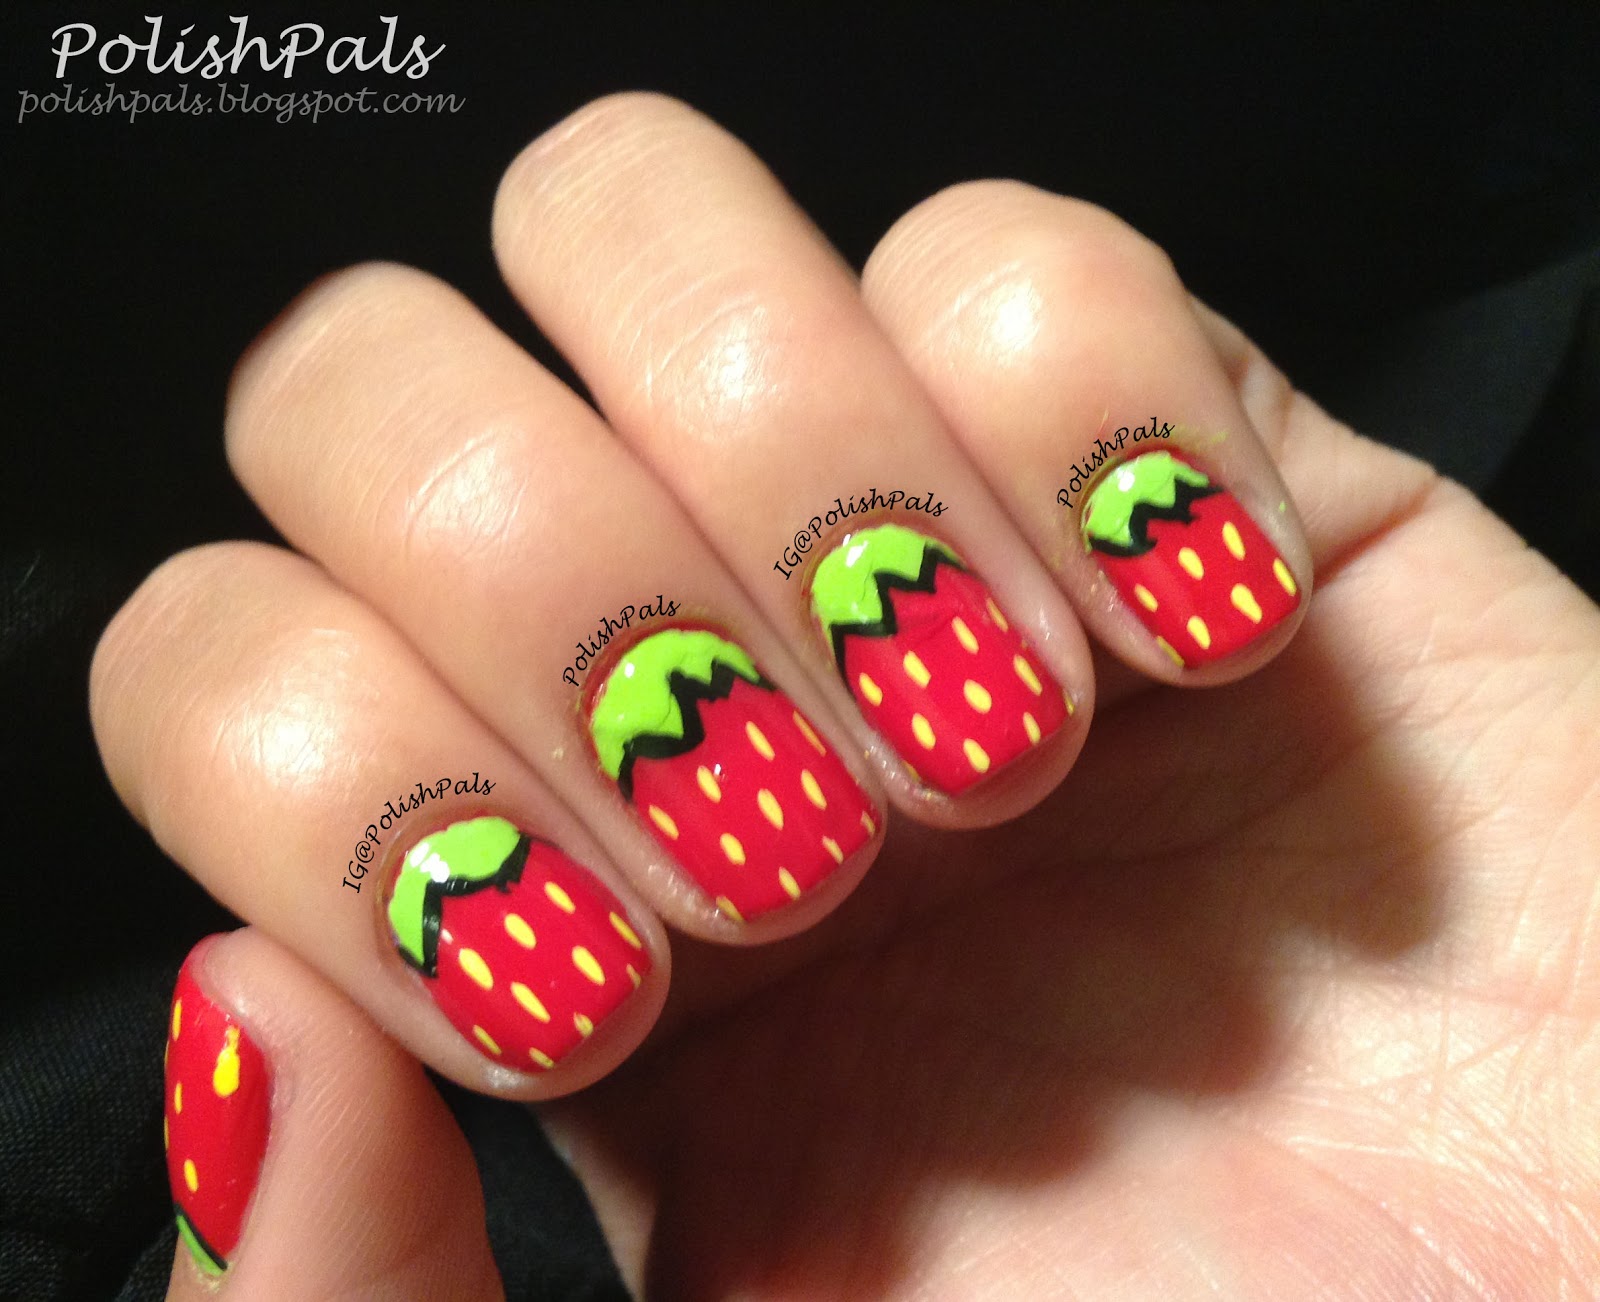 10. Strawberry French Tip Nails - wide 4